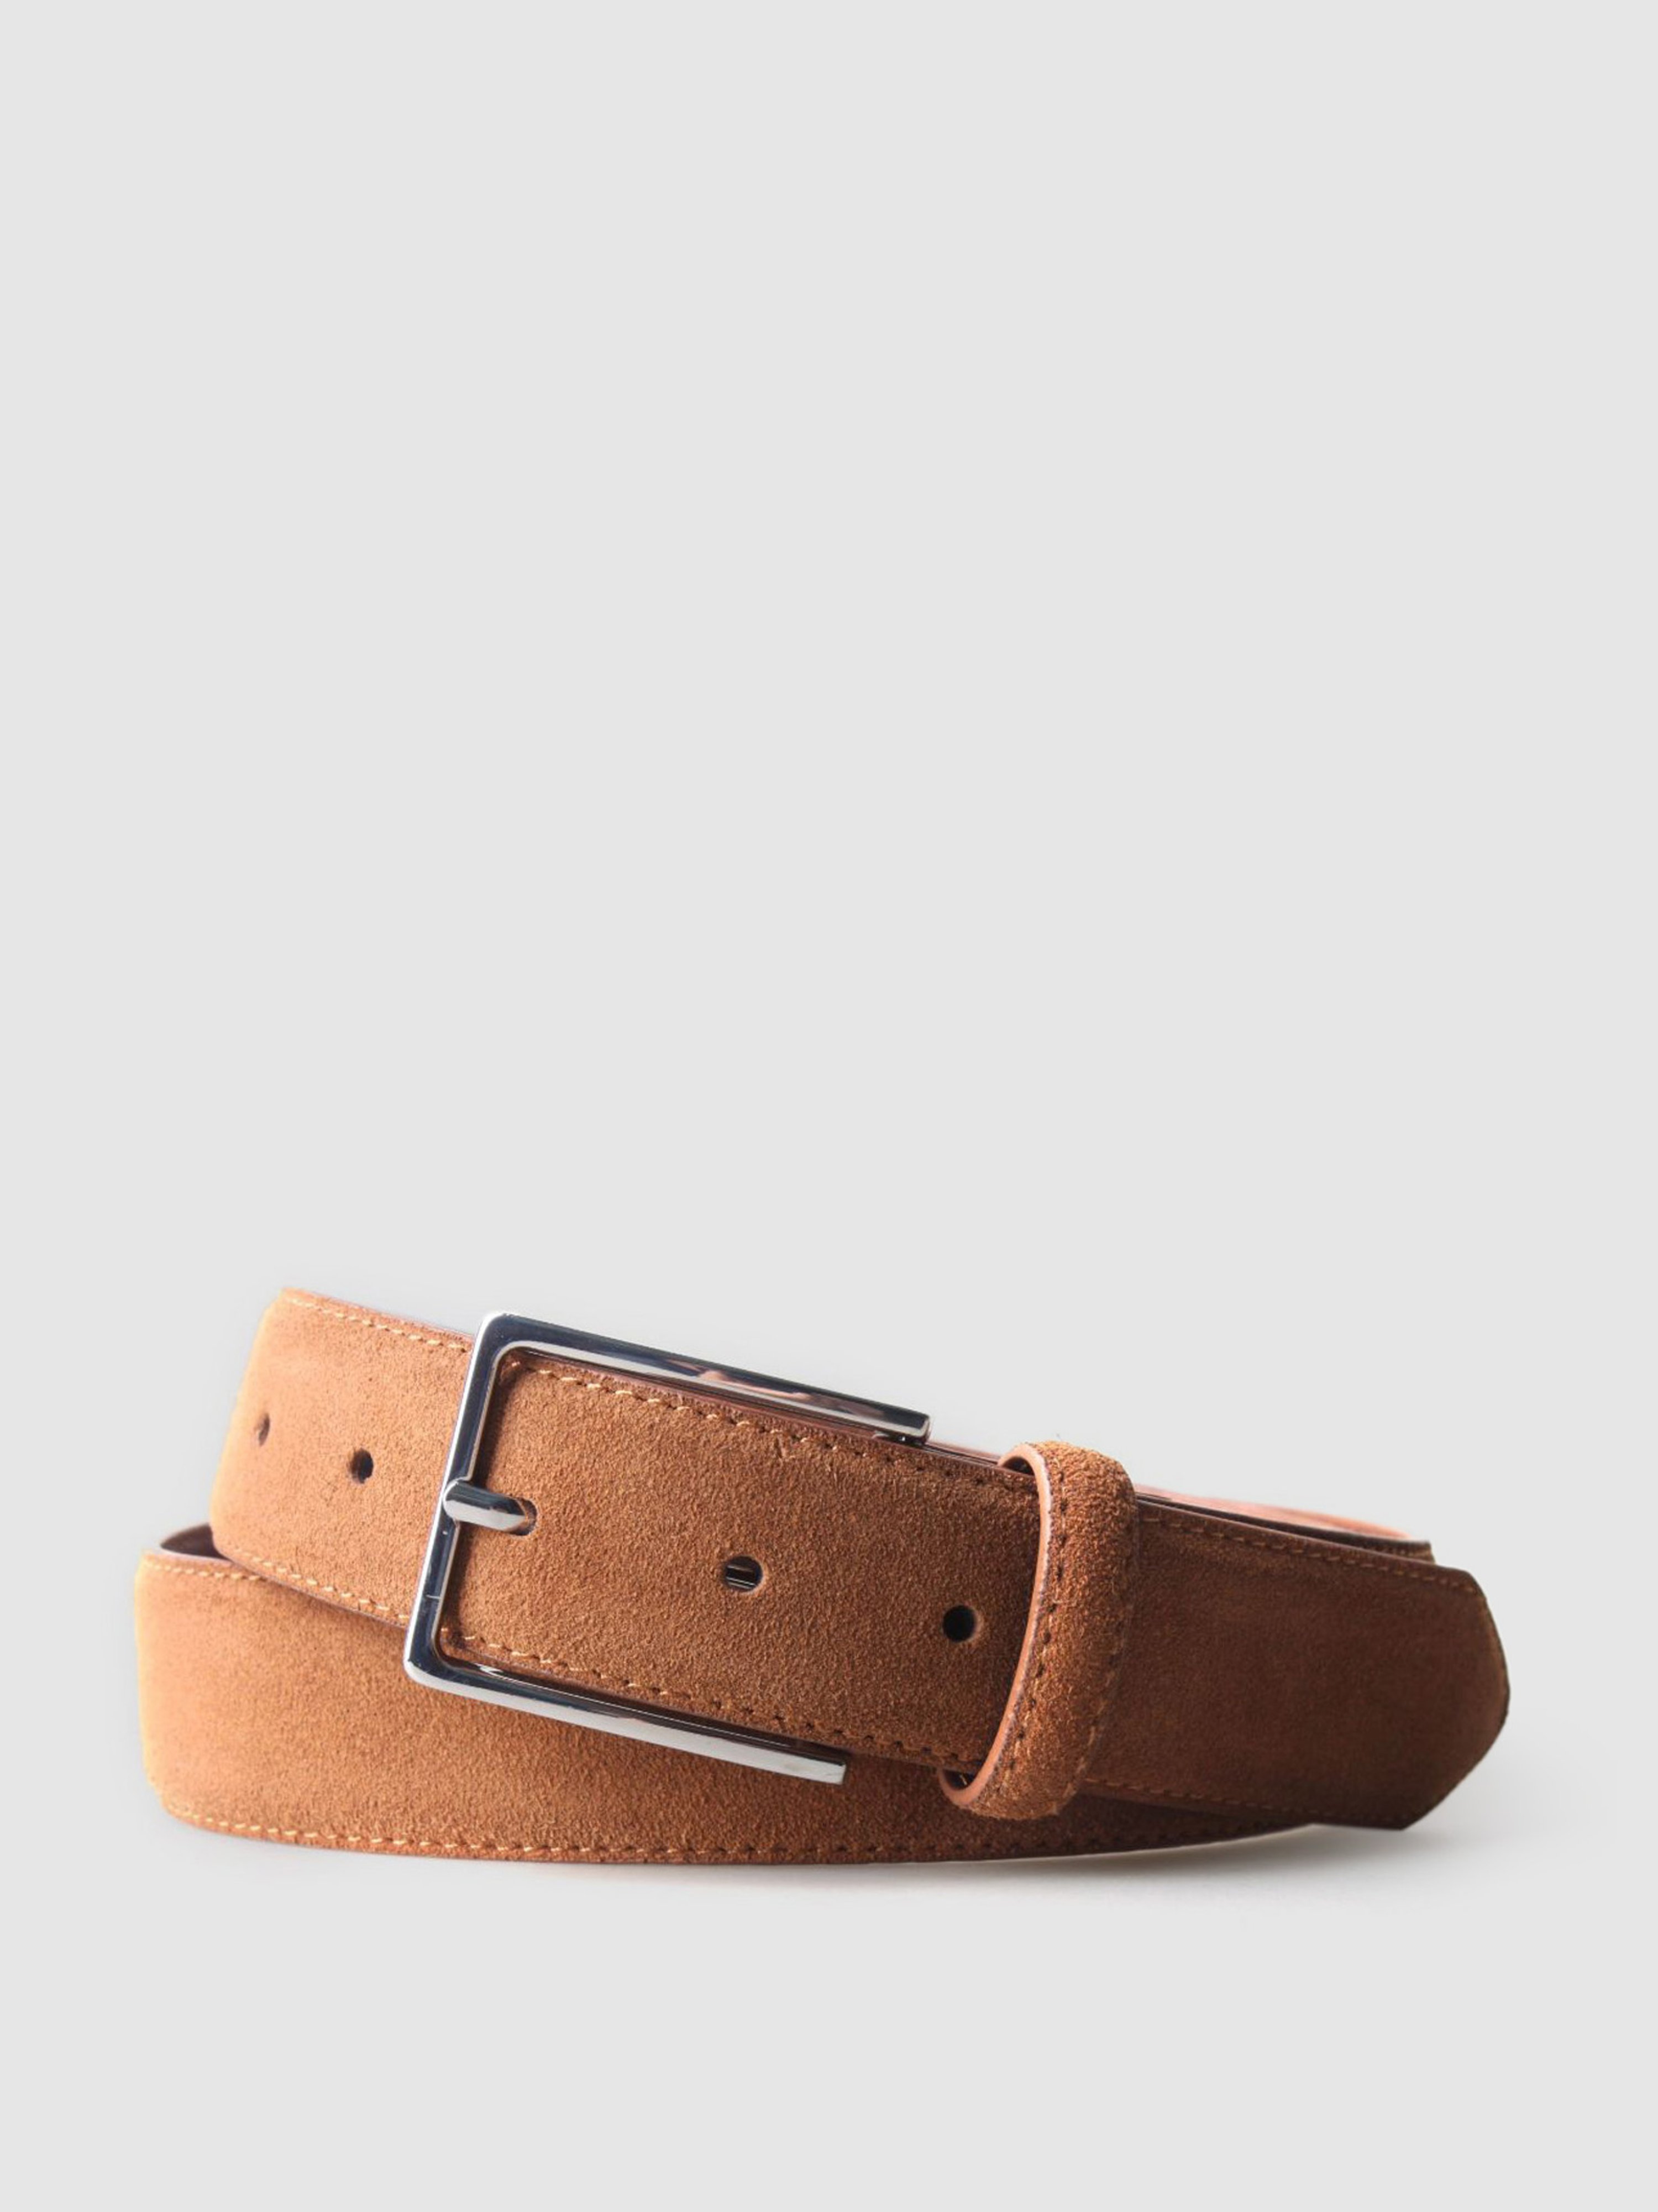 PX PX REMY SUEDE LEATHER 3.5 CM BELT